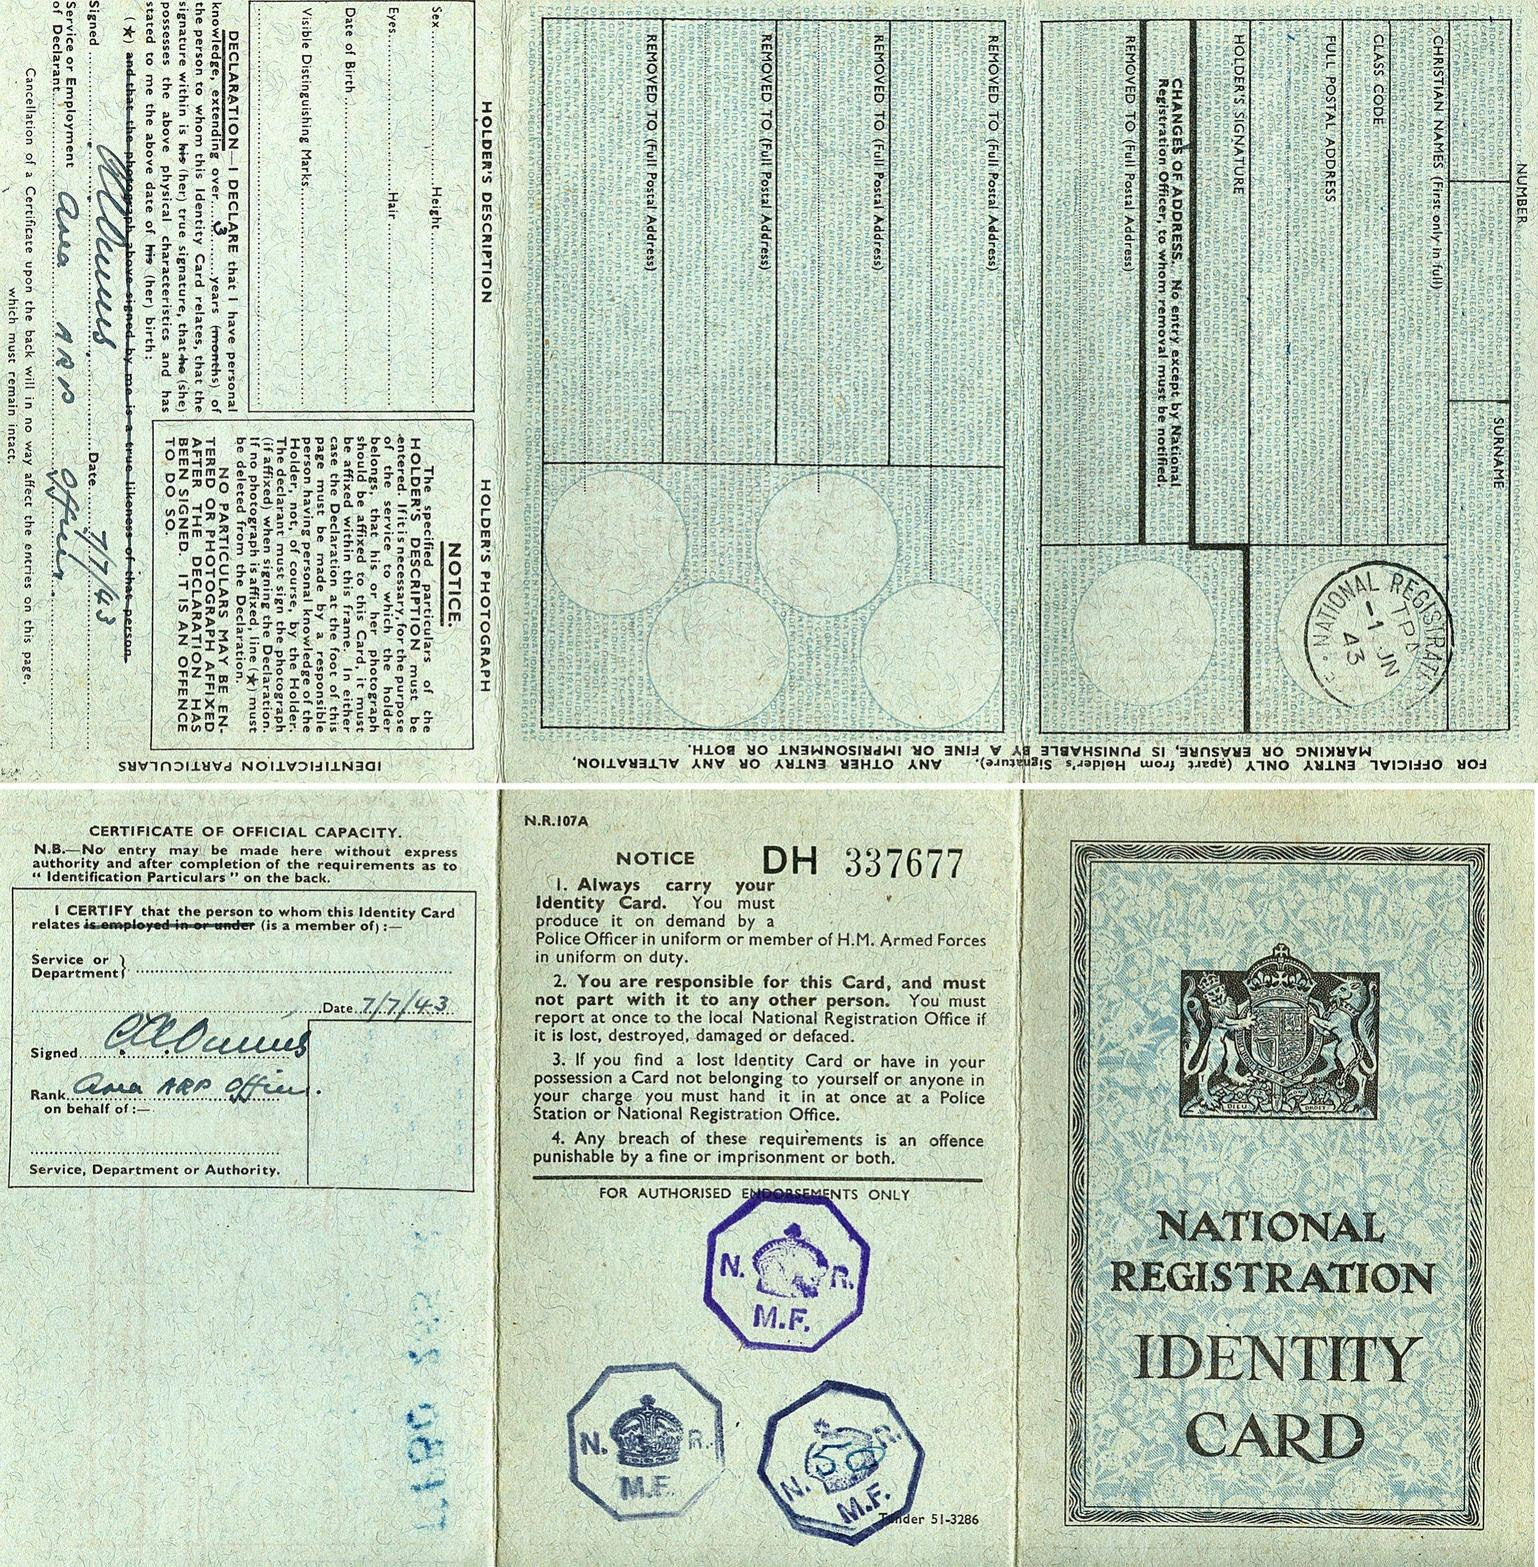 National Registration Identity Card Template   Images throughout World War 2 Identity Card Template